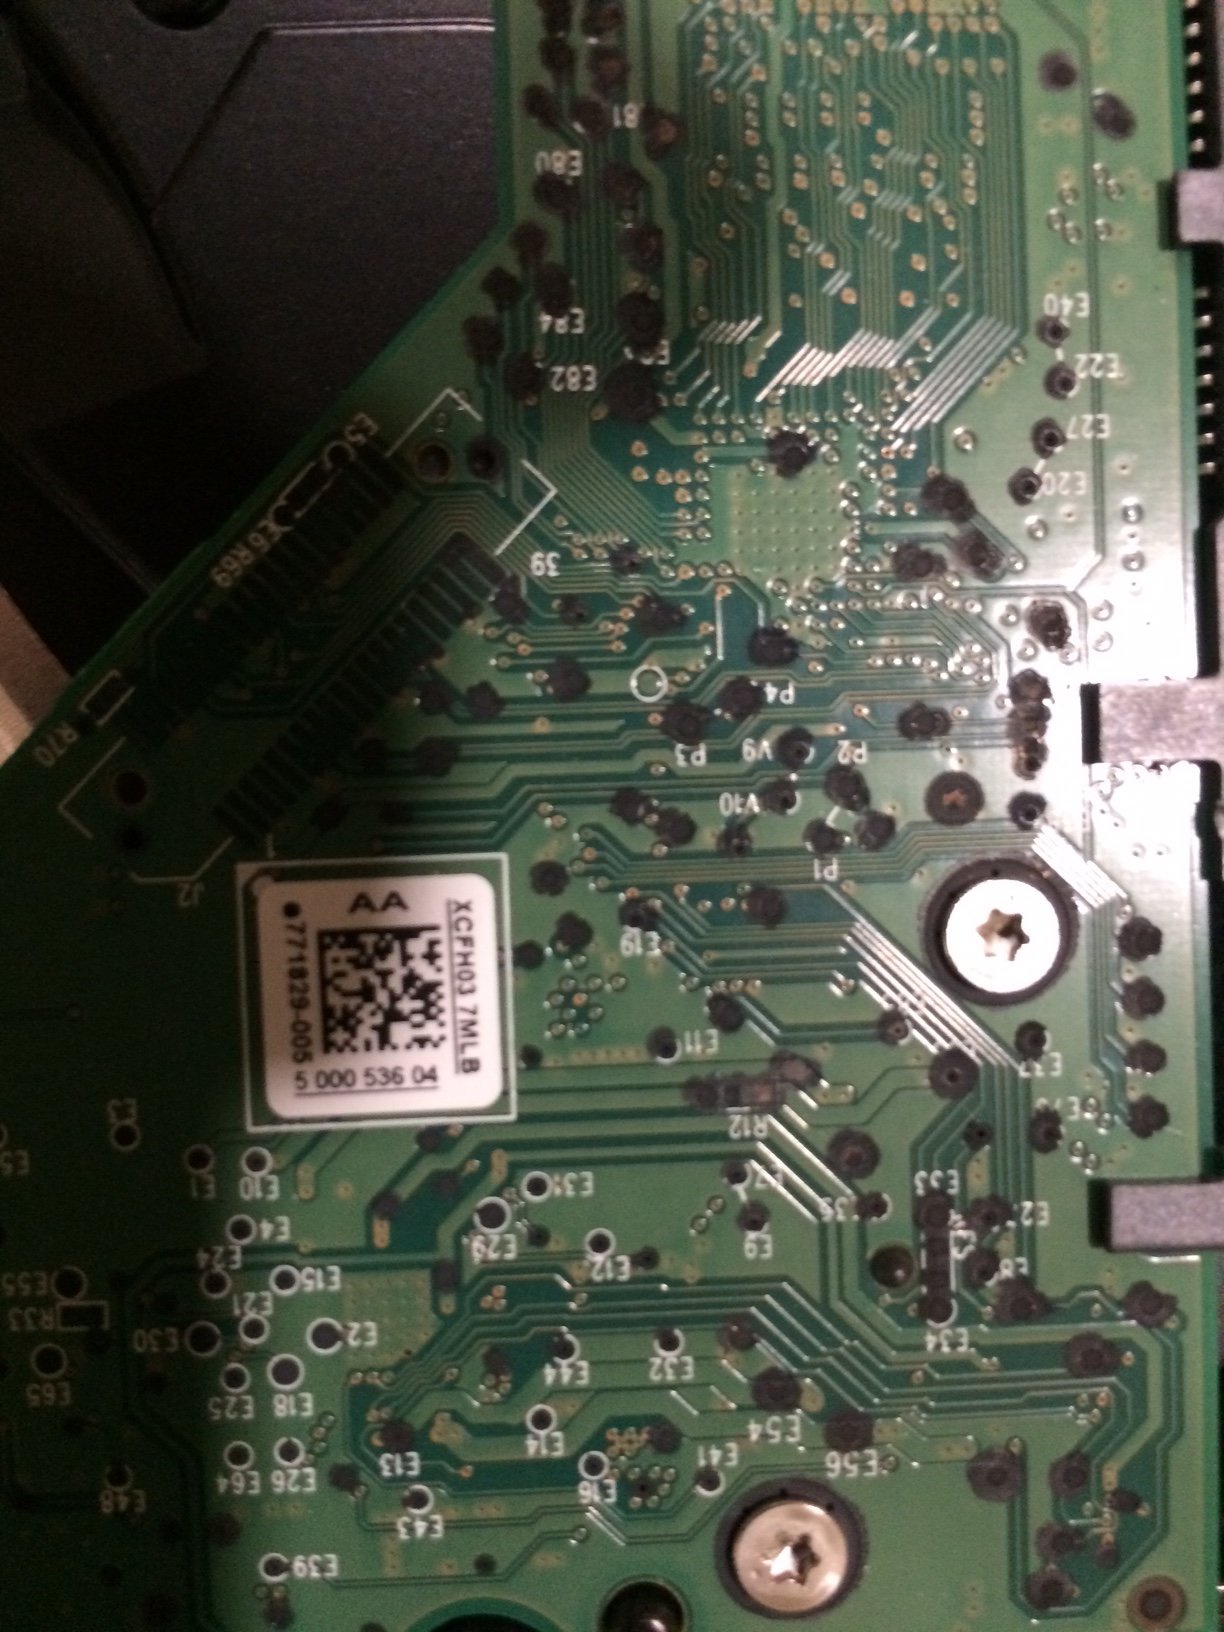 lack so much soup what causes the black corrosion /deposit on the pcb? | Electronics Forum  (Circuits, Projects and Microcontrollers)